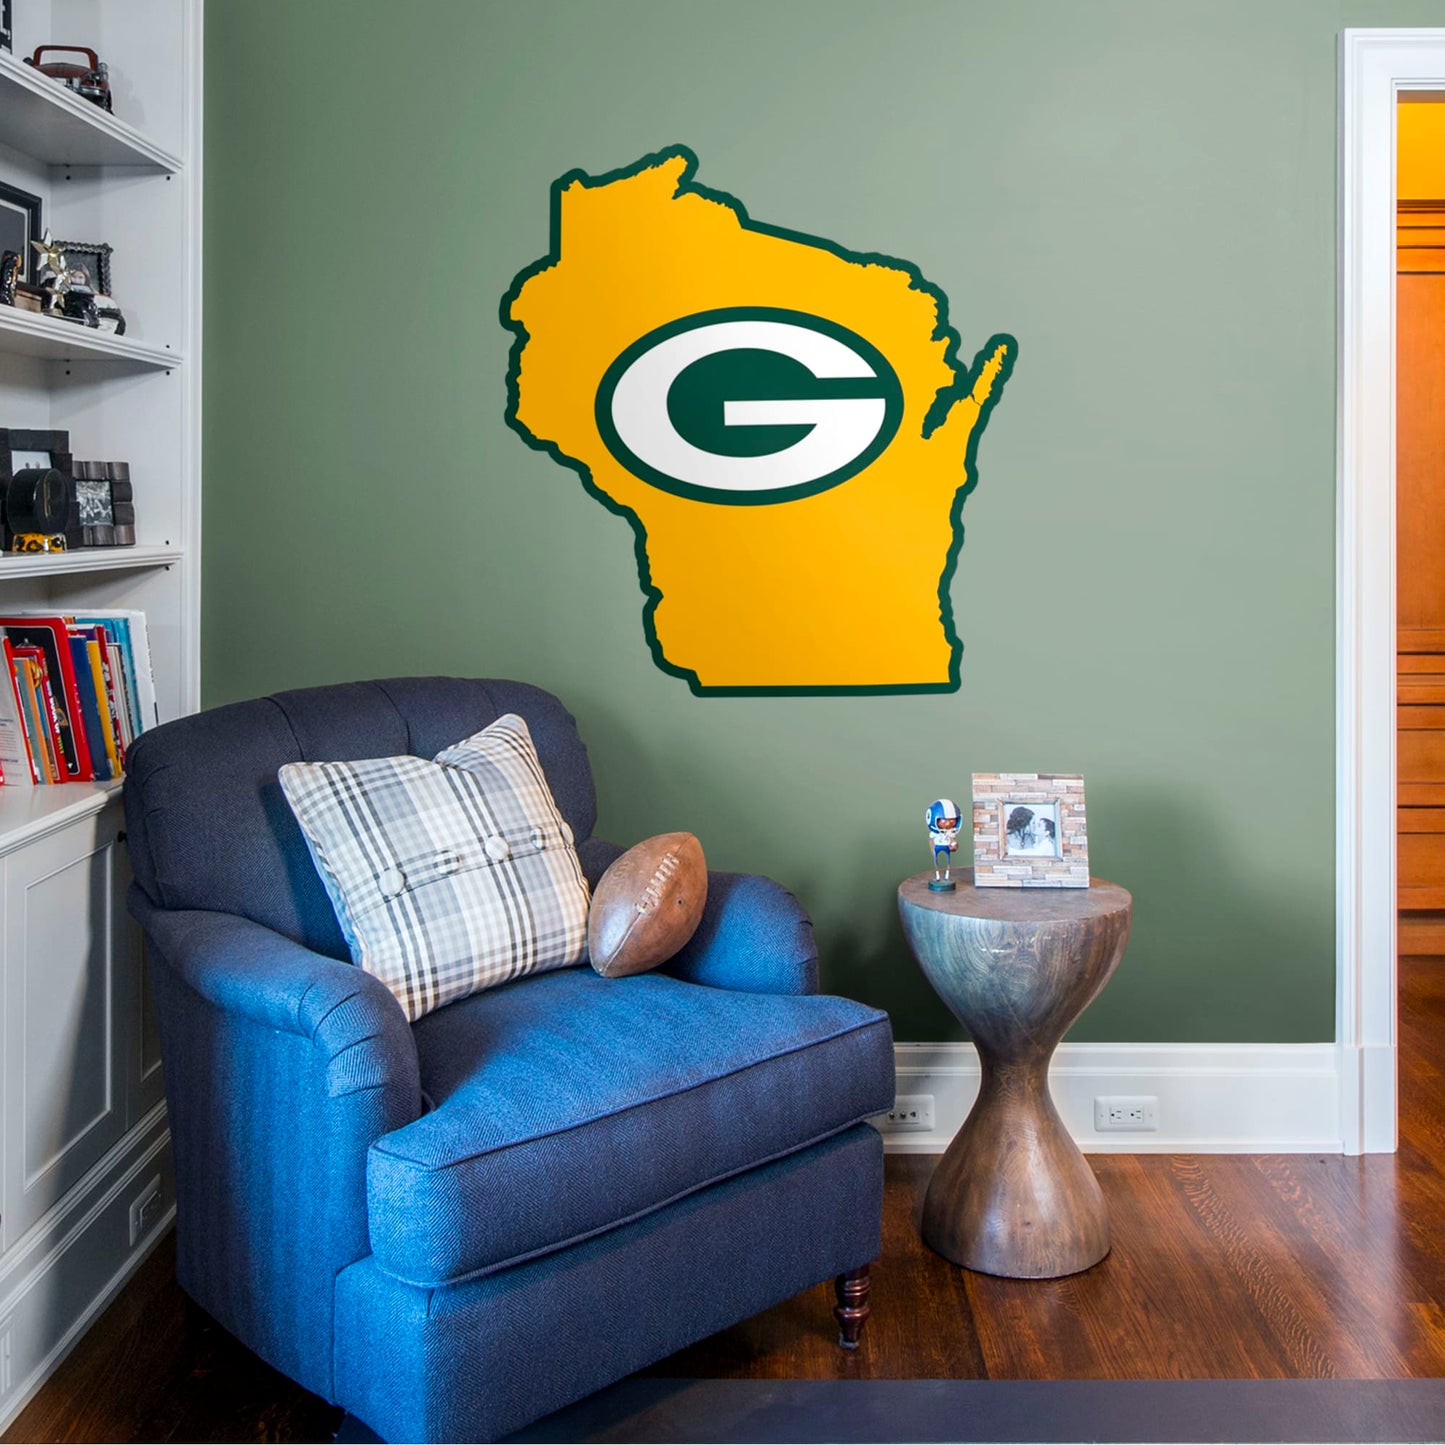 Green Bay Packers: State of Wisconsin - Officially Licensed NFL Removable Wall Decal